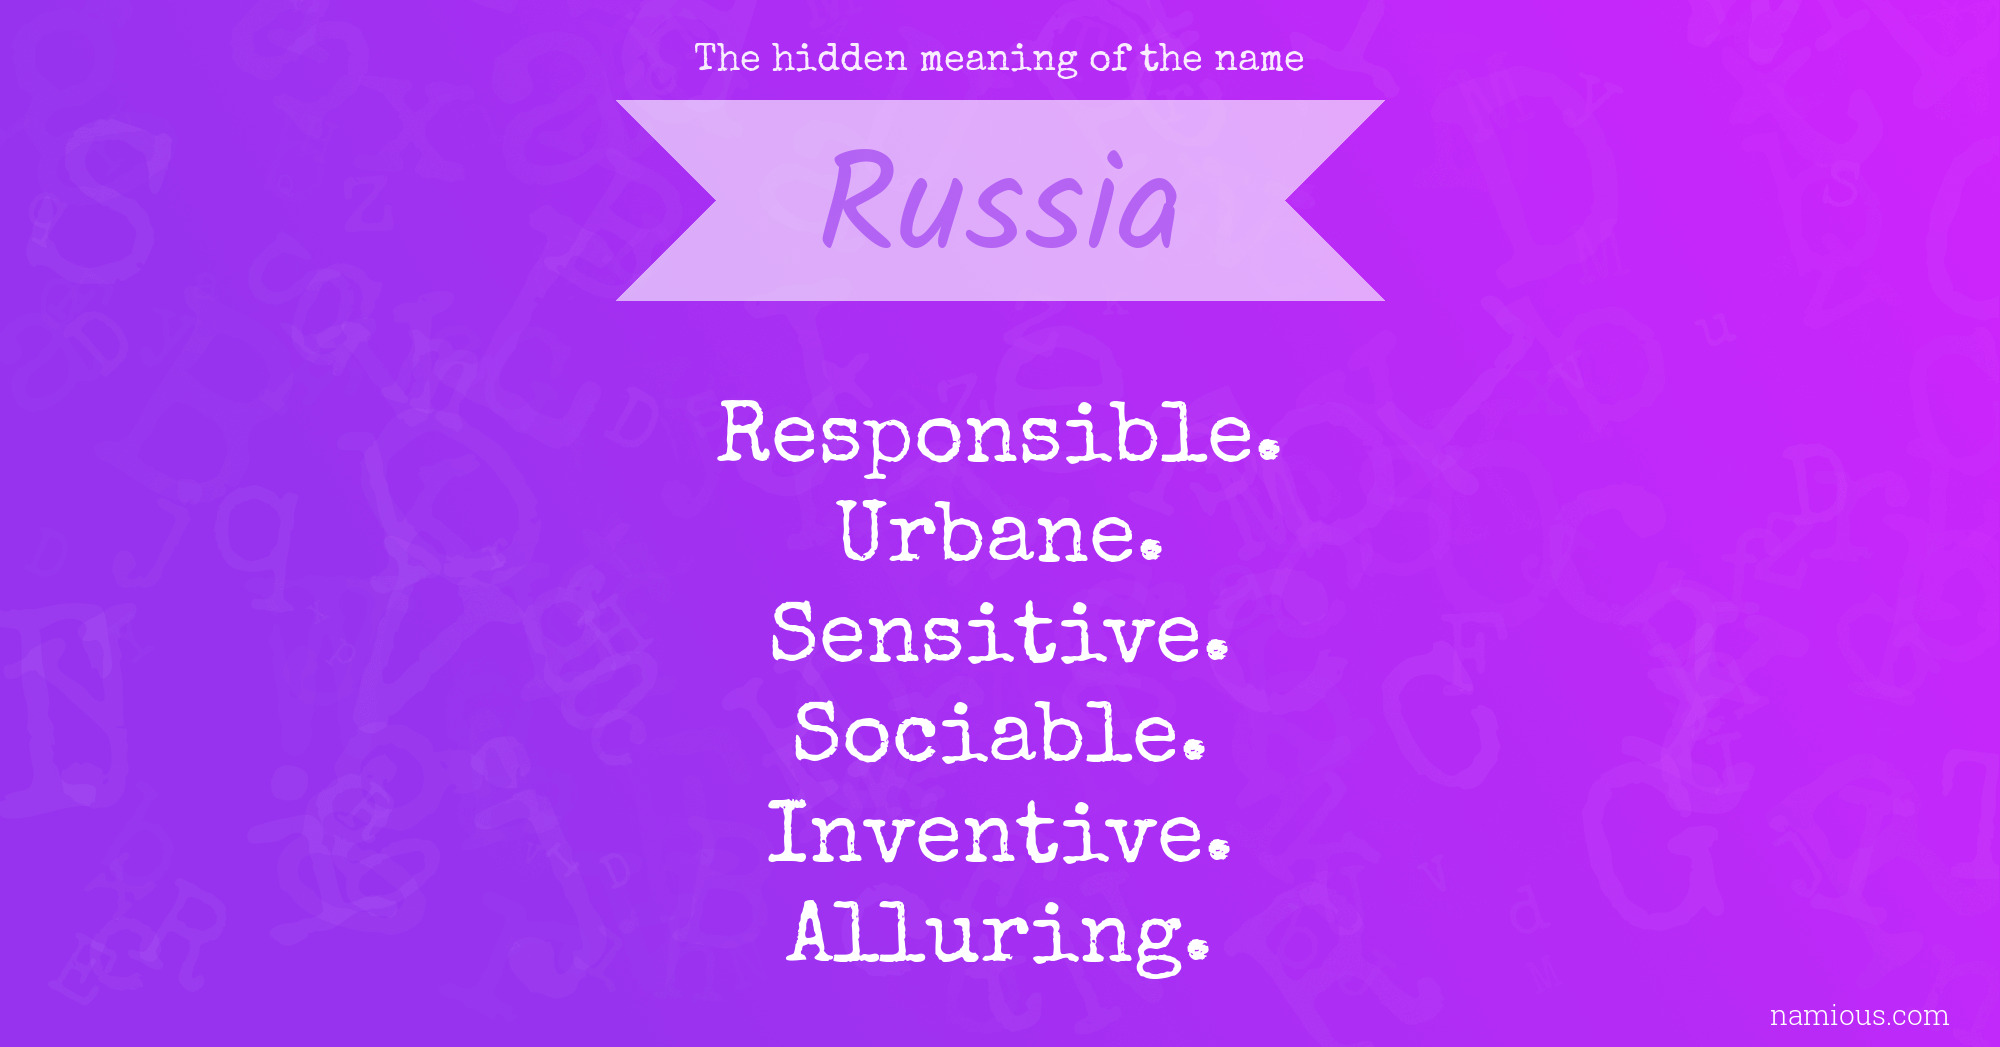 The hidden meaning of the name Russia